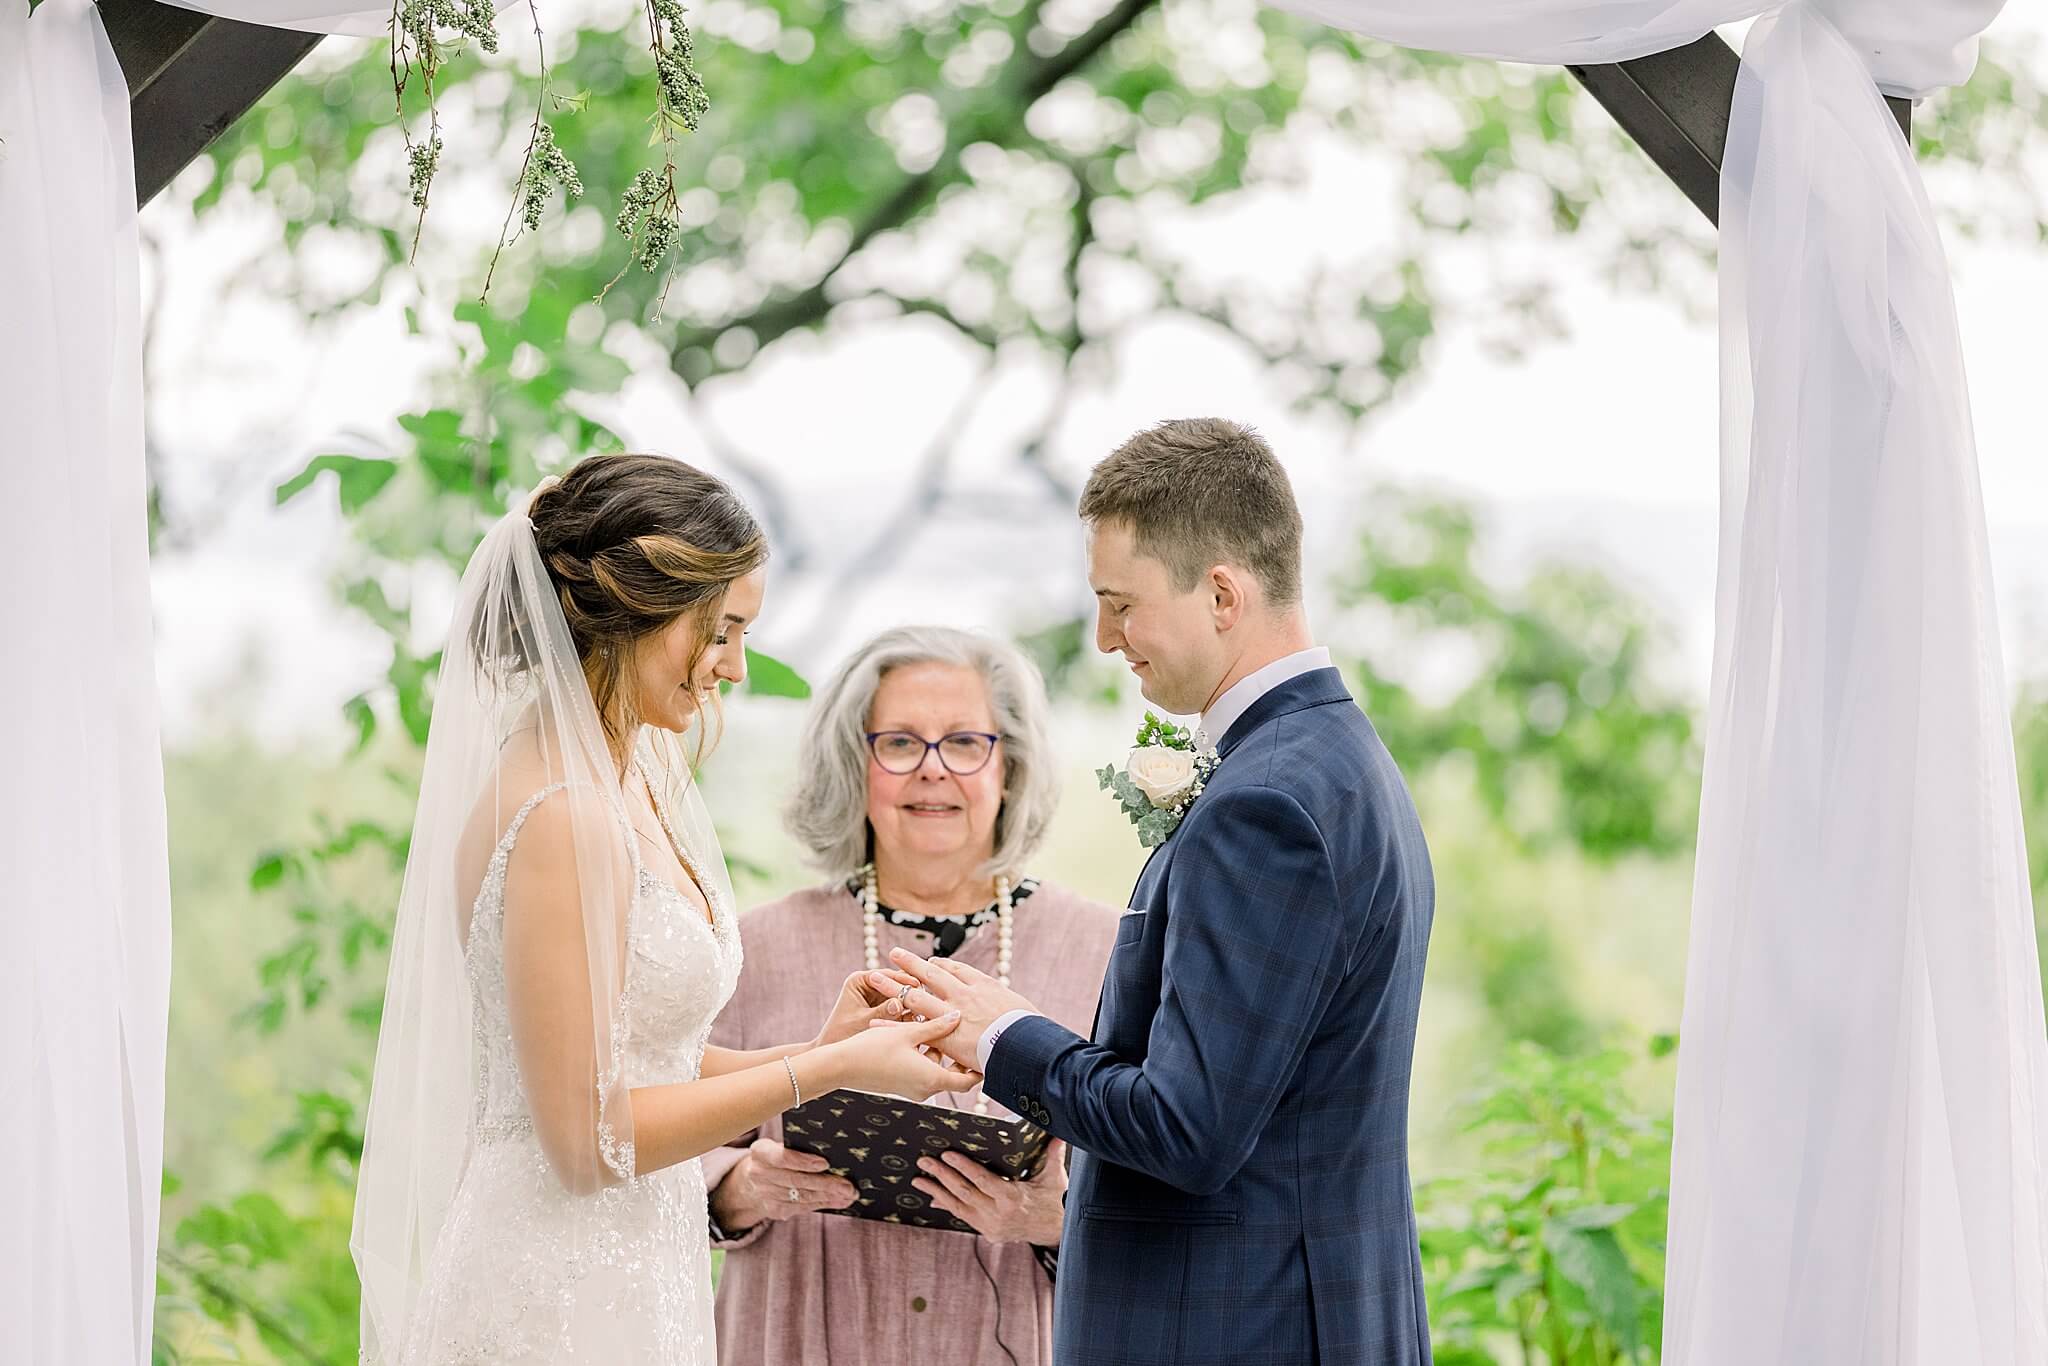 Bride places ring on groom's finger during their wedding ceremony for their Intimate Northern Michigan Wedding.